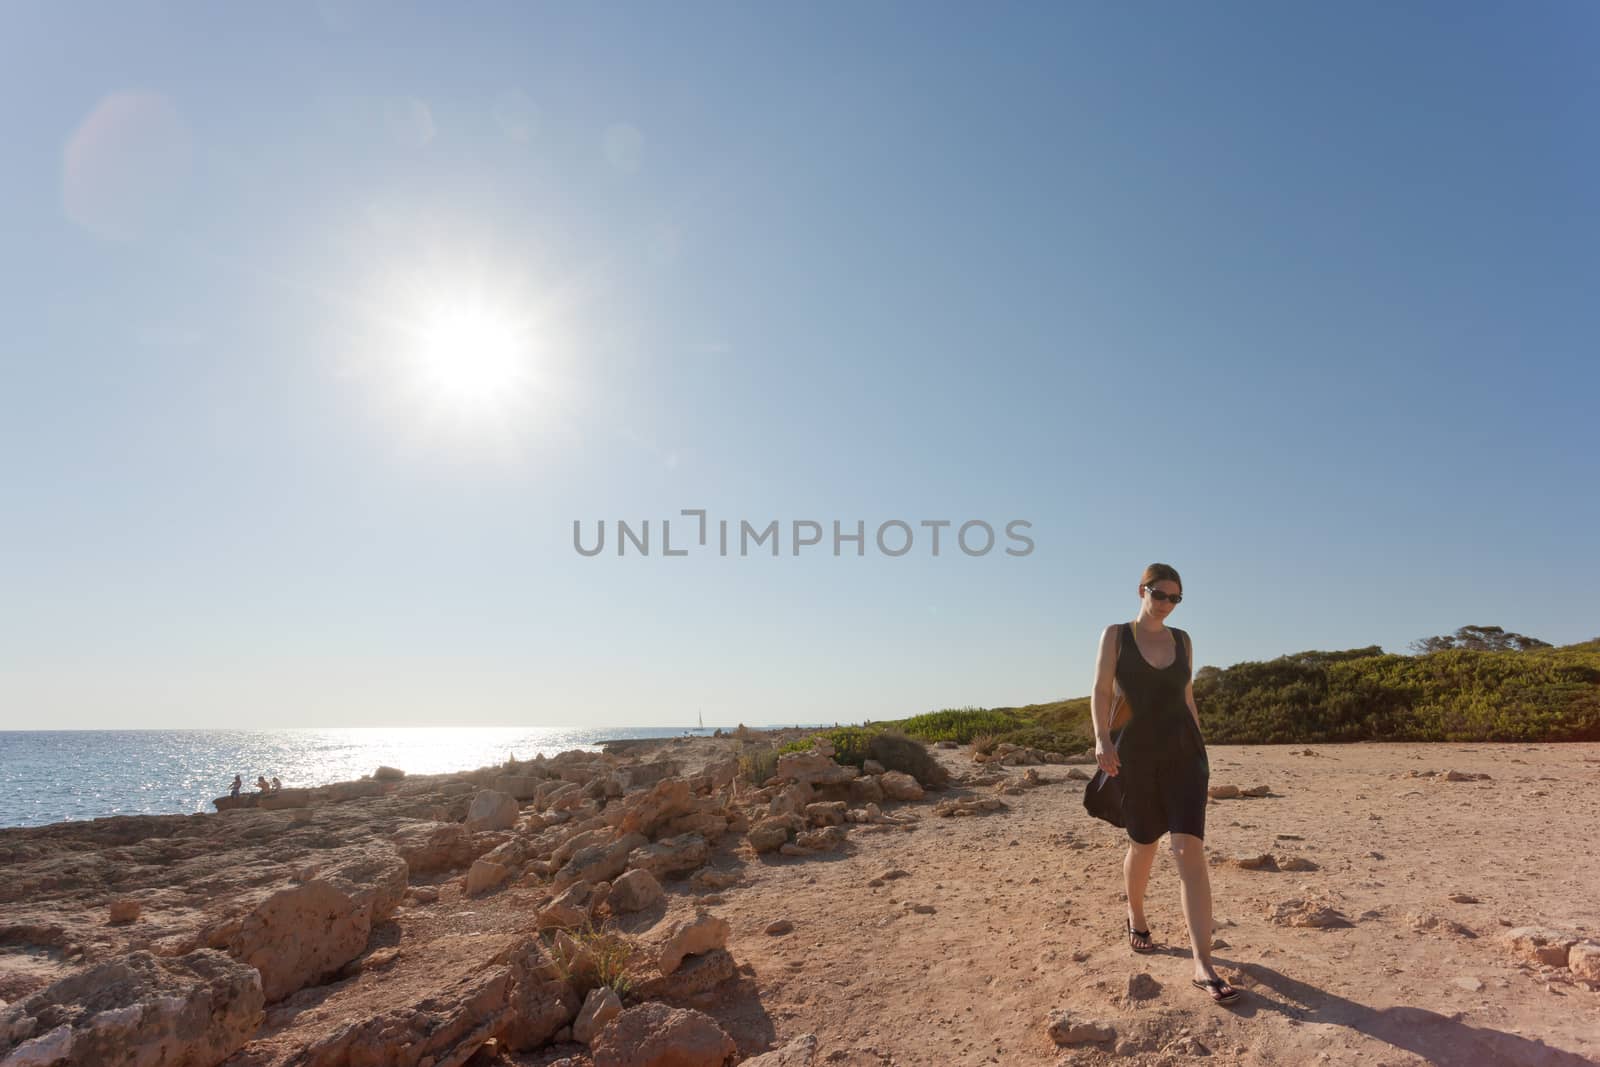 Cap de Ses Salines, Mallorca - A young woman going out for a wal by tagstiles.com